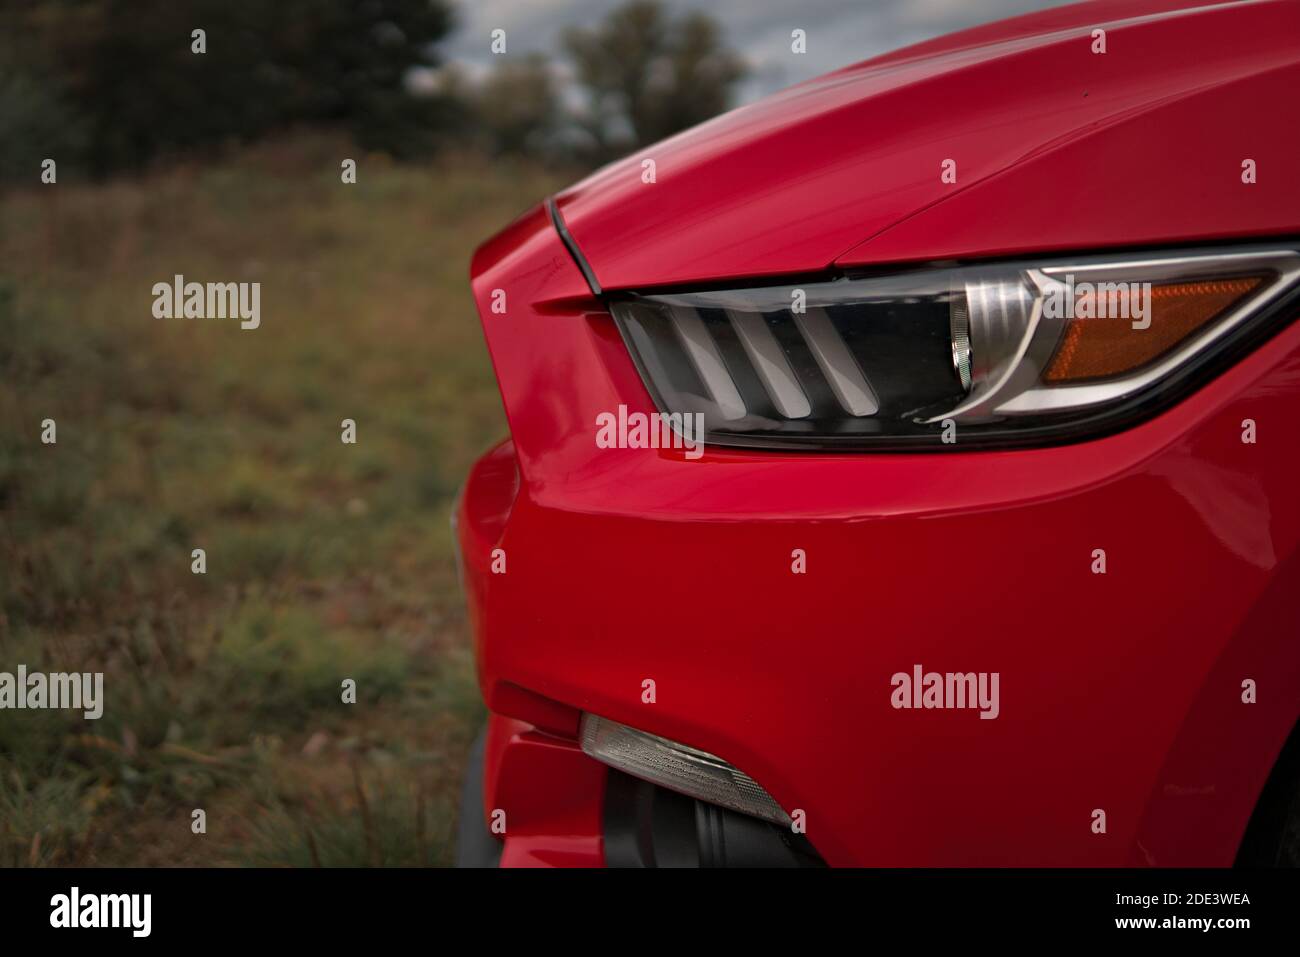 A close-up from a Ford Mustang car front Stock Photo